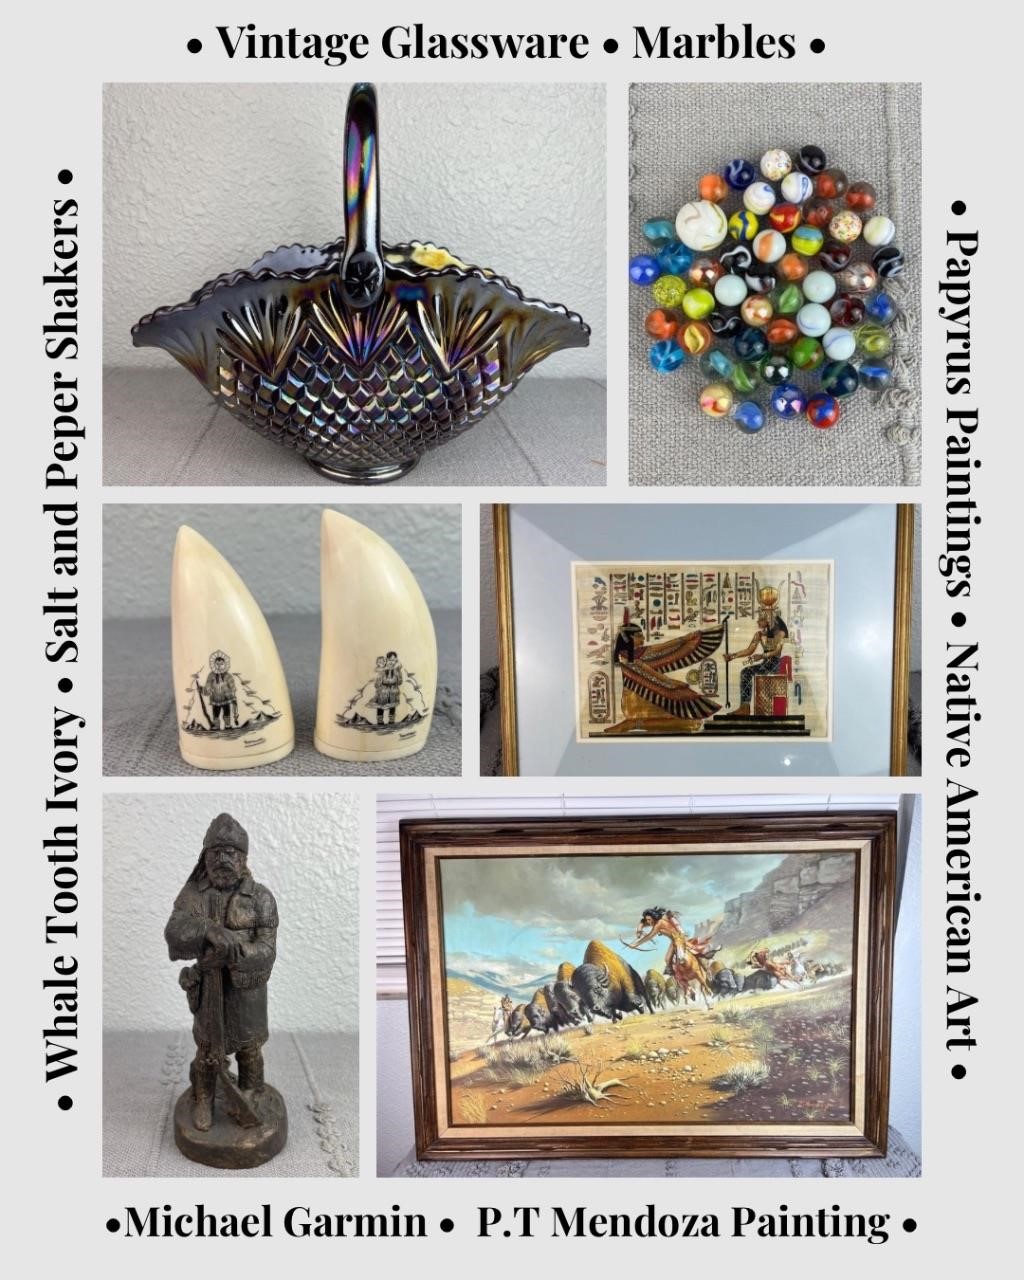 Native American, Vintage Holiday, Collectibles, and More